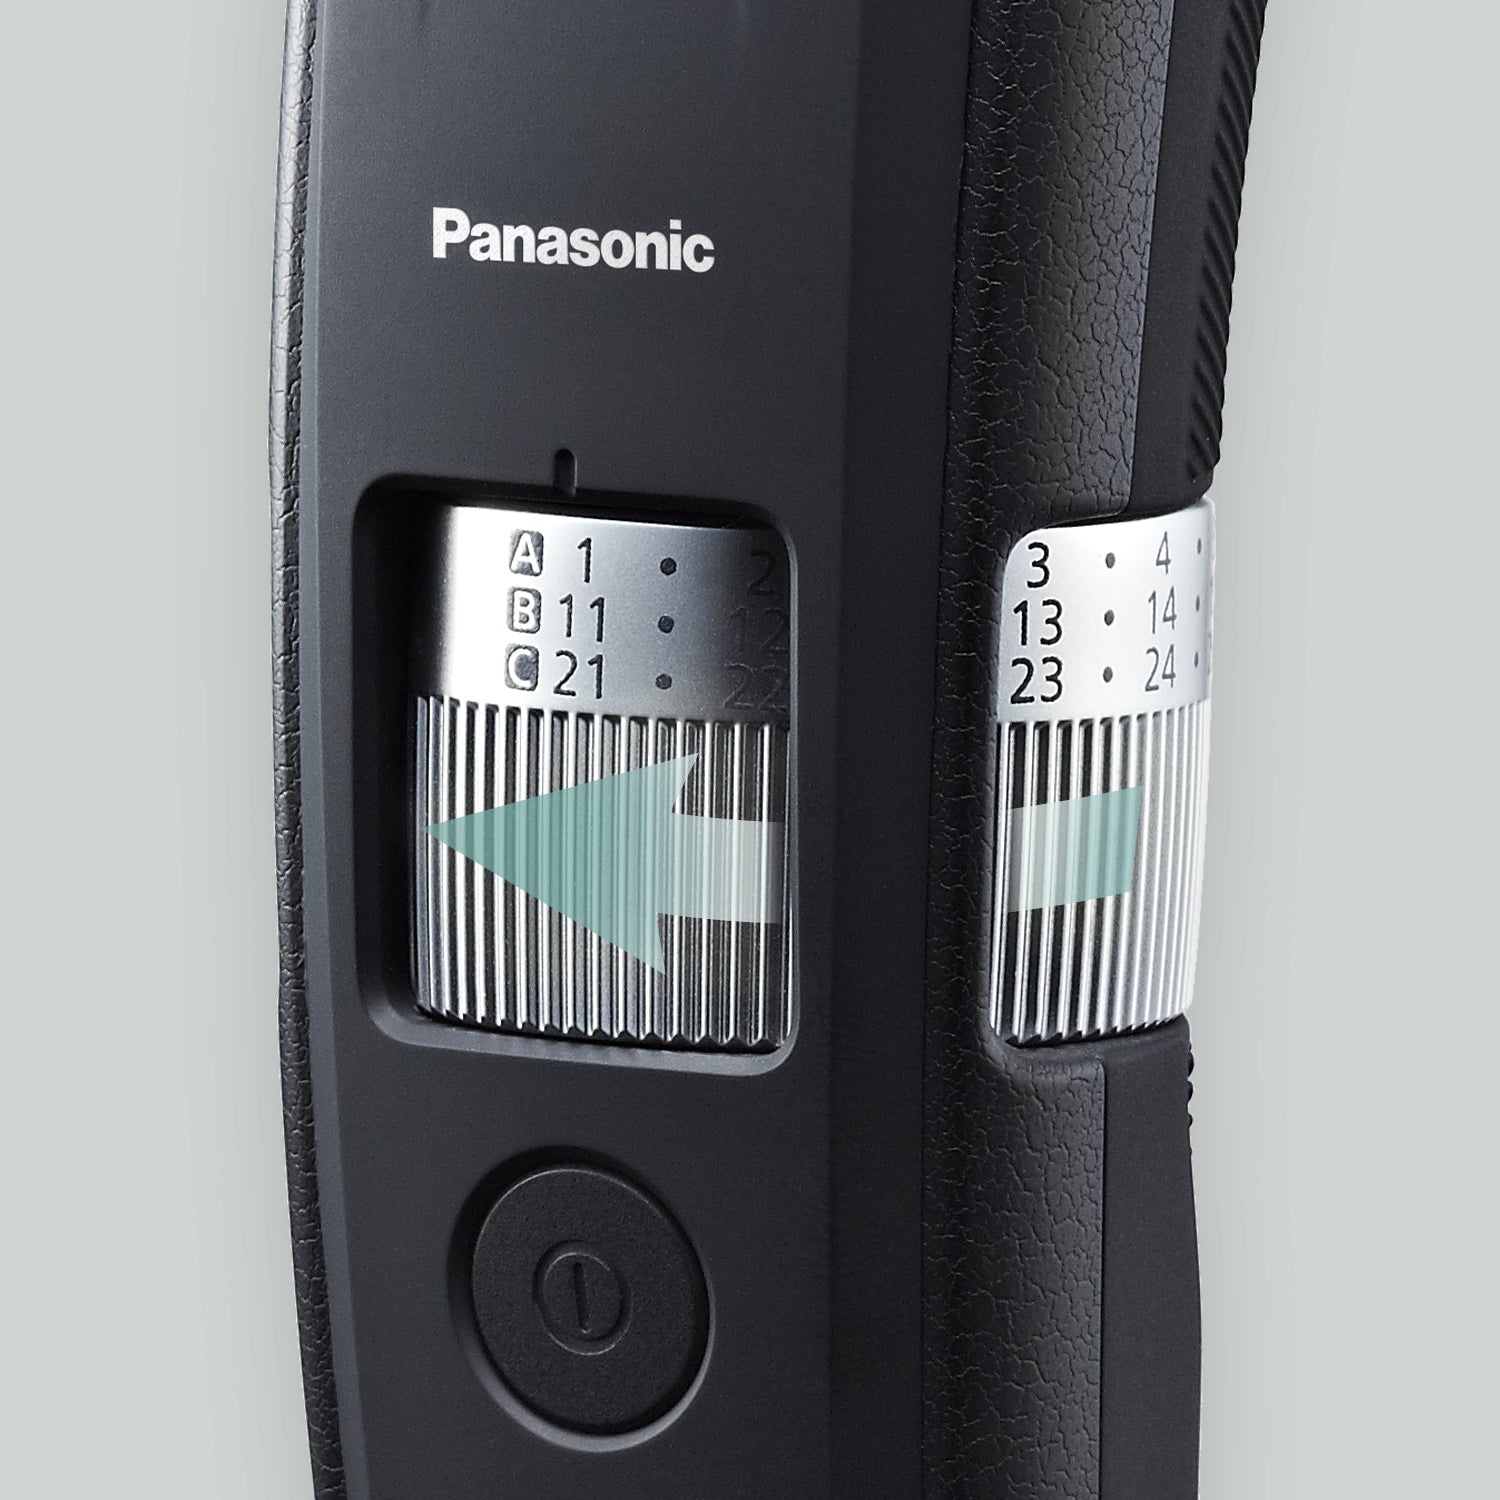 Panasonic Long Beard Hair Trimmer Comb Adjustable Attachments with Length and ER-GB96-K - 4 Settings 58